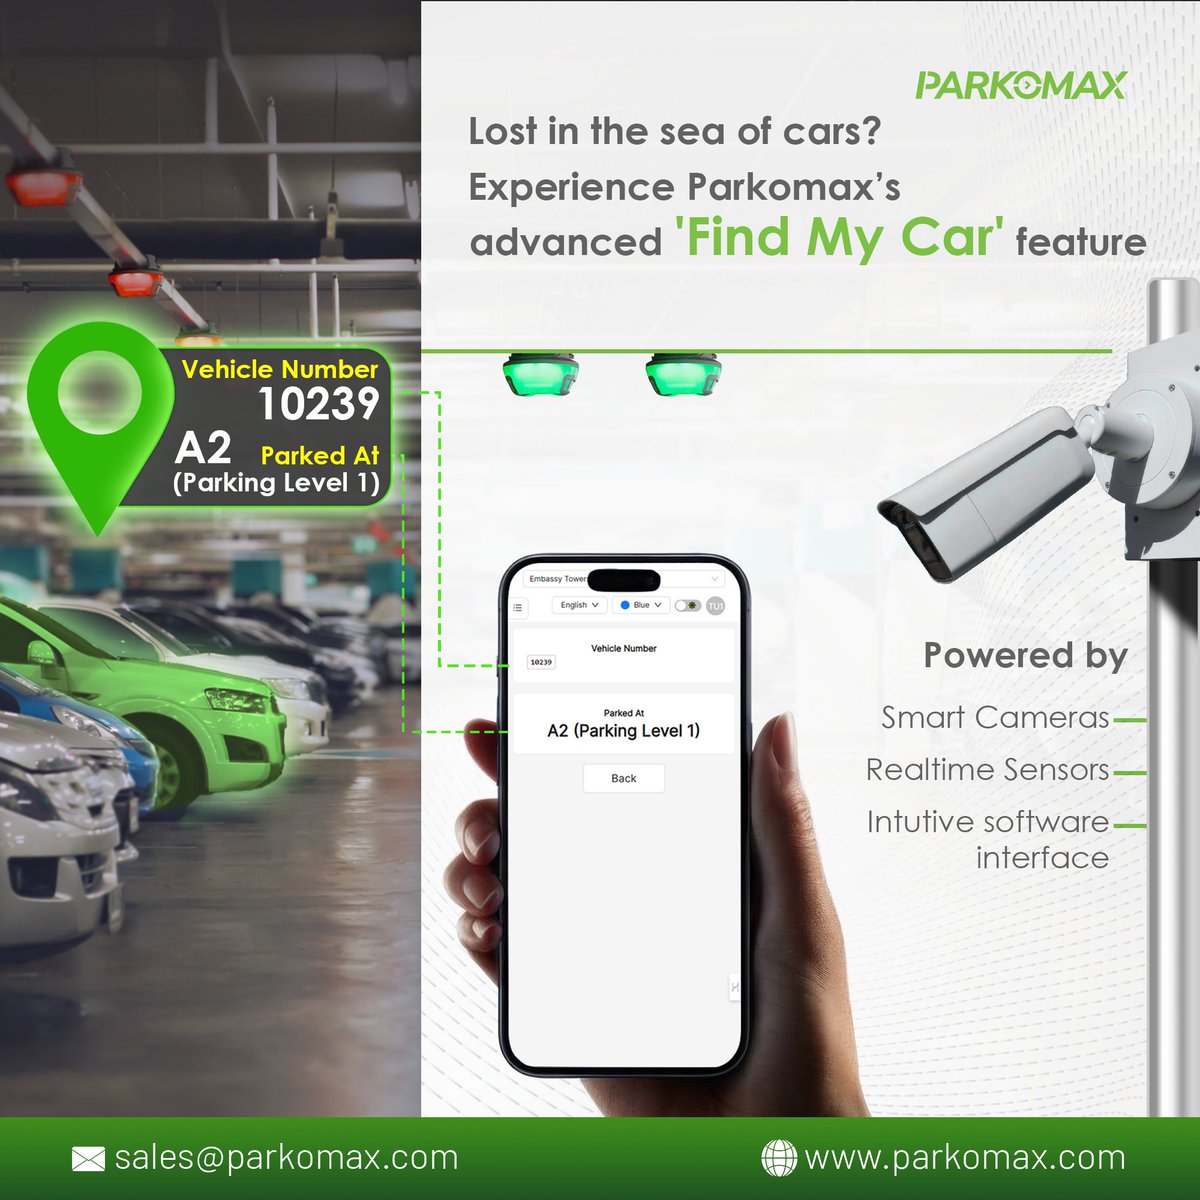 Never lose your car in the parking lot again!

Introducing Parkomax's innovative 'Find My Car' feature.

Now, park with confidence!

vist.ly/343qh 

#Parkomax #FindMyCar #SmartParking #ParkingInnovation #ParkingMangement #ParkingGuidance